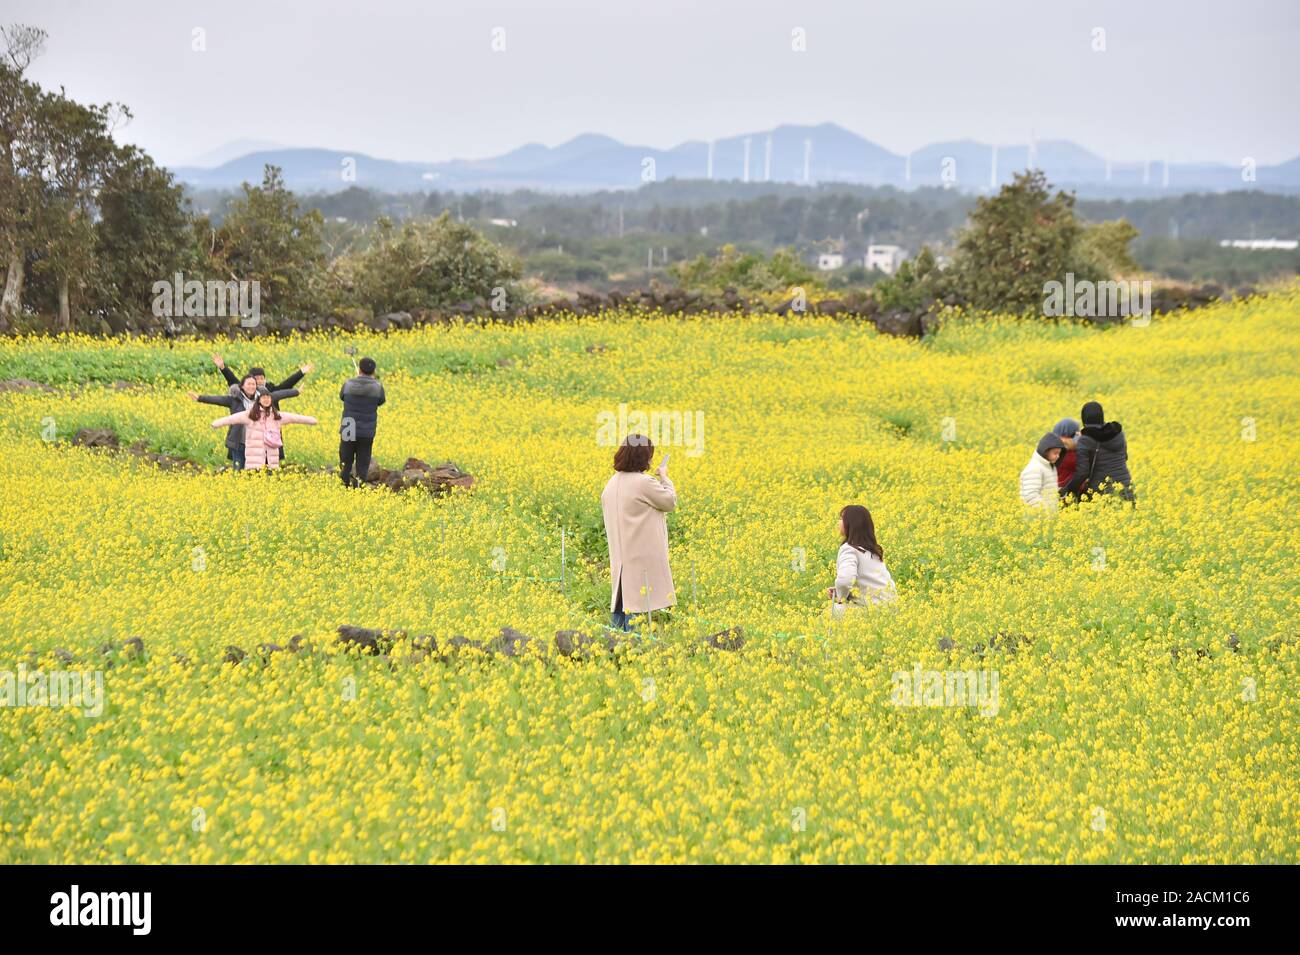 03rd Dec, 2019. Rape flowers in winter Tourists take pictures at a field of blooming rape flowers in Seogwipo on South Korea's southernmost resort island of Jeju on Dec. 3, 2019. Credit: Yonhap/Newcom/Alamy Live News Stock Photo